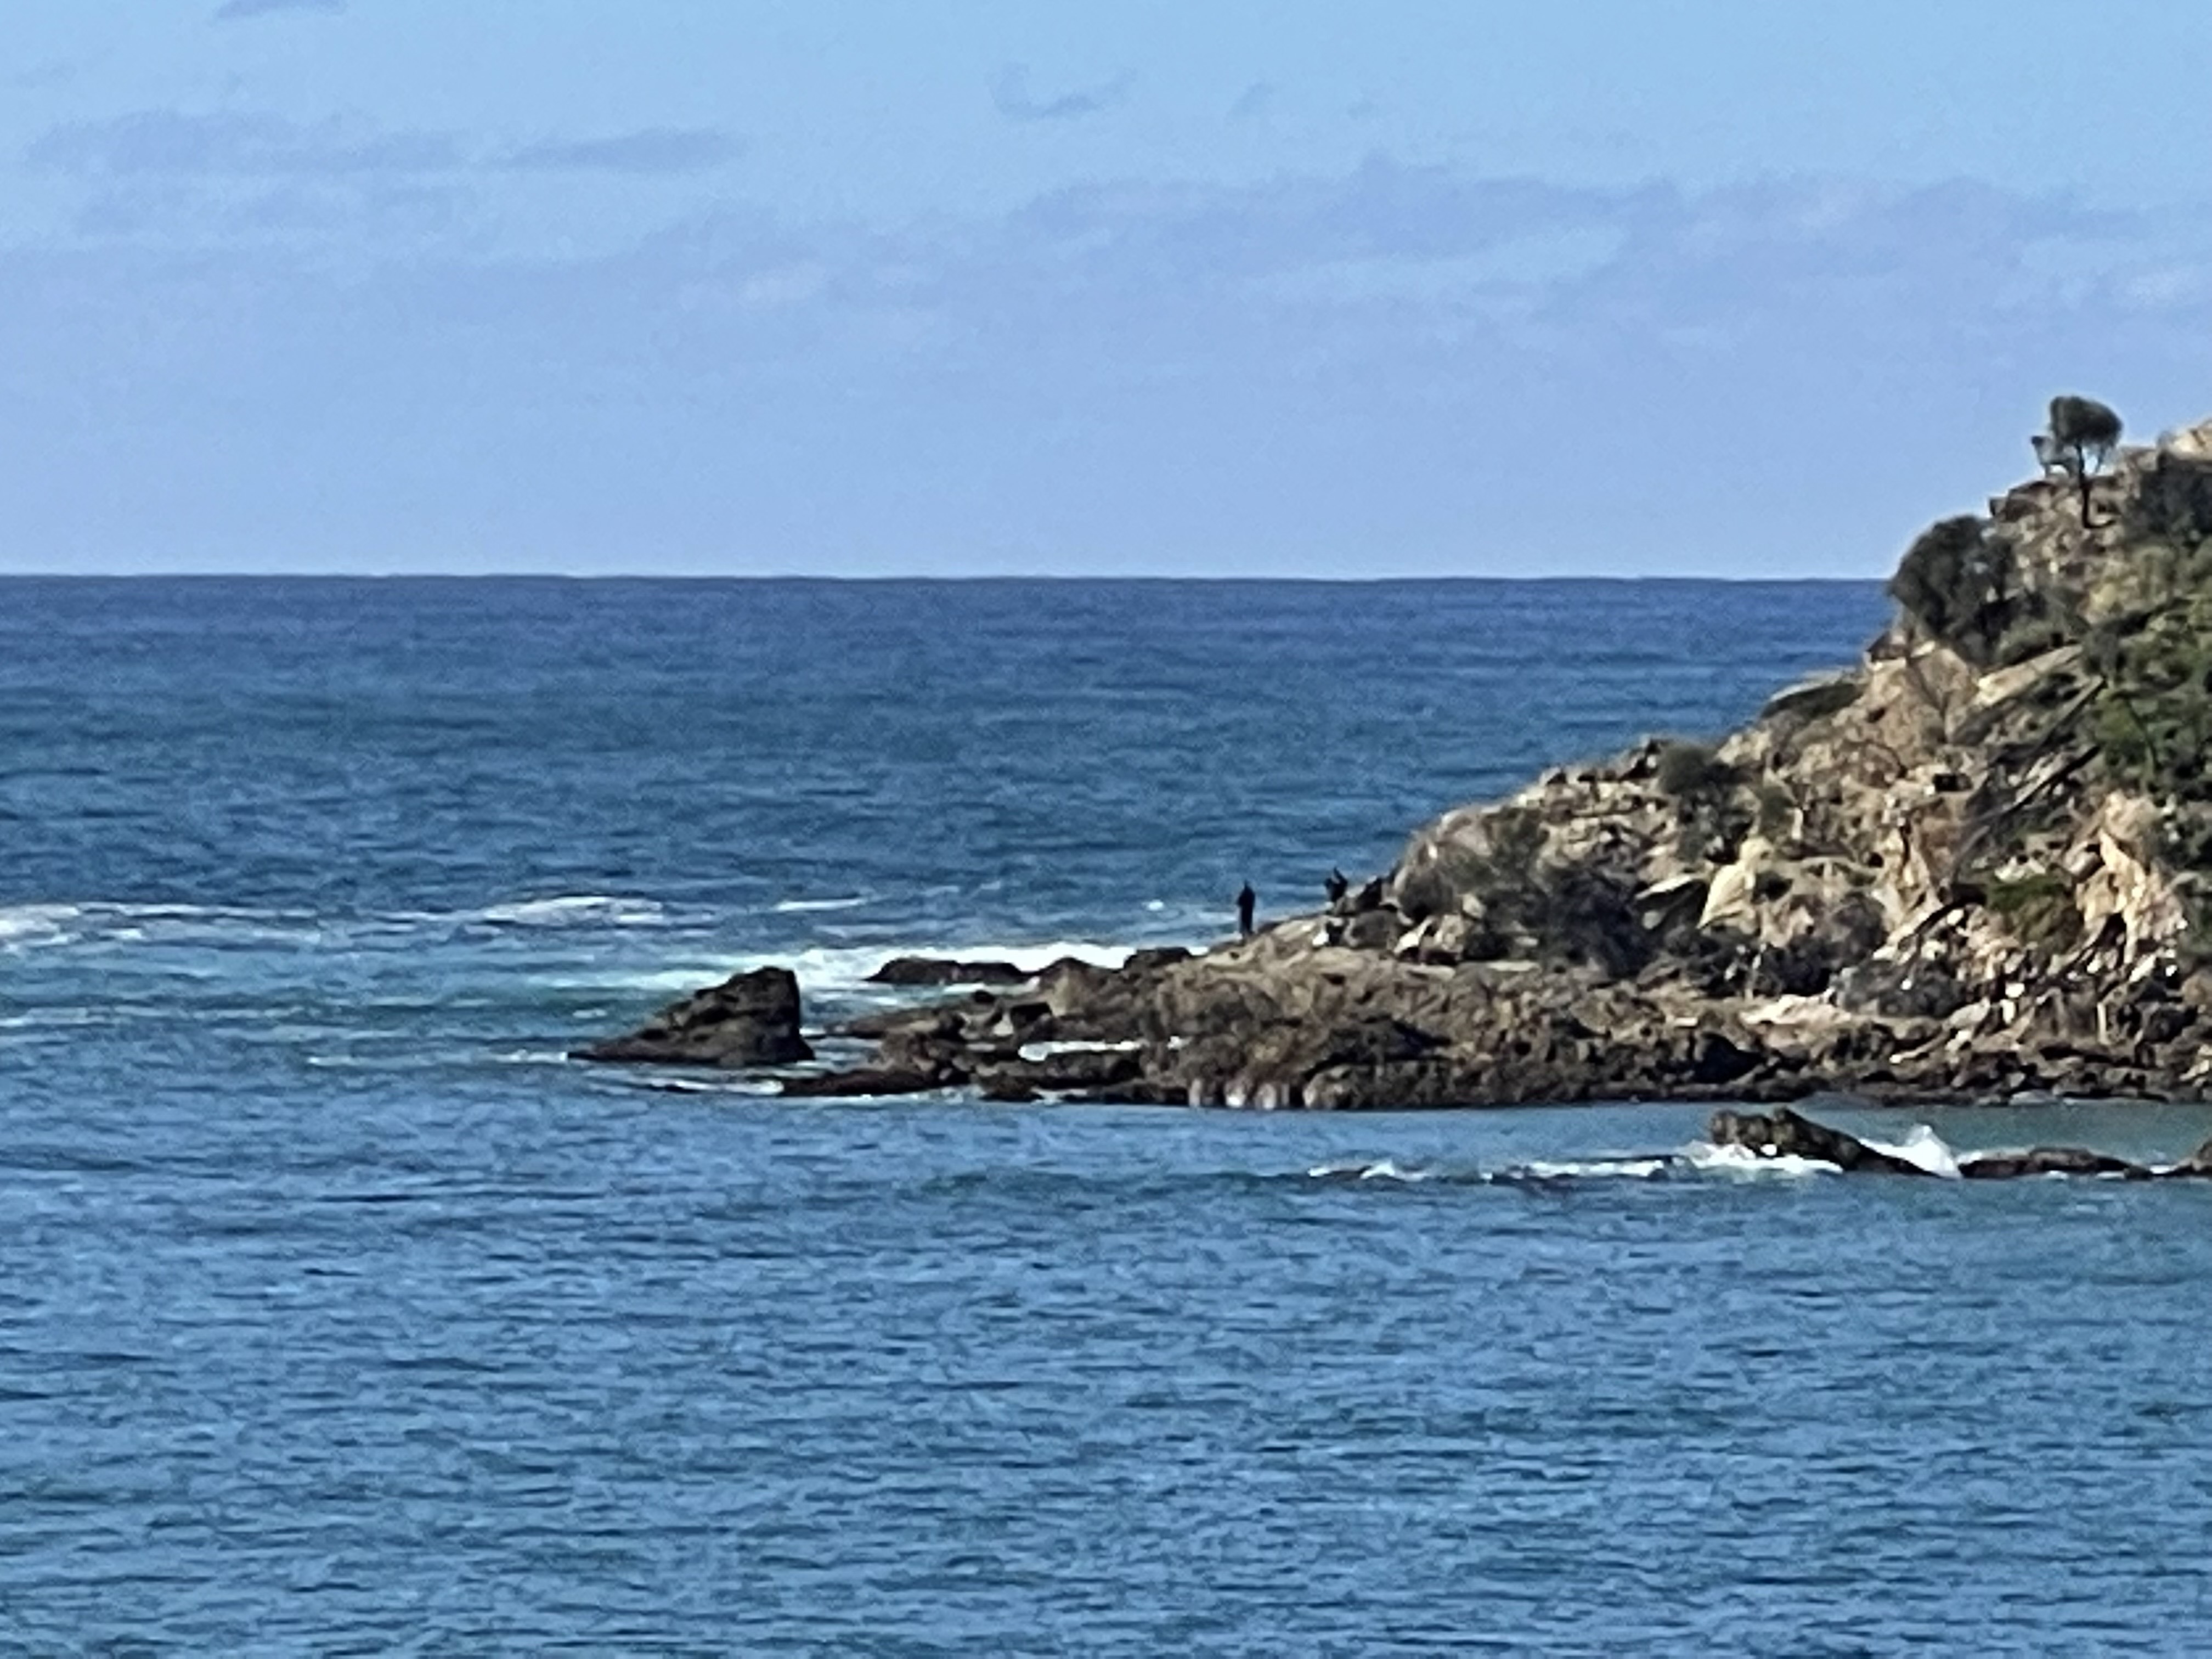 Fishers back on the rocks after near-drowning at Malua Bay